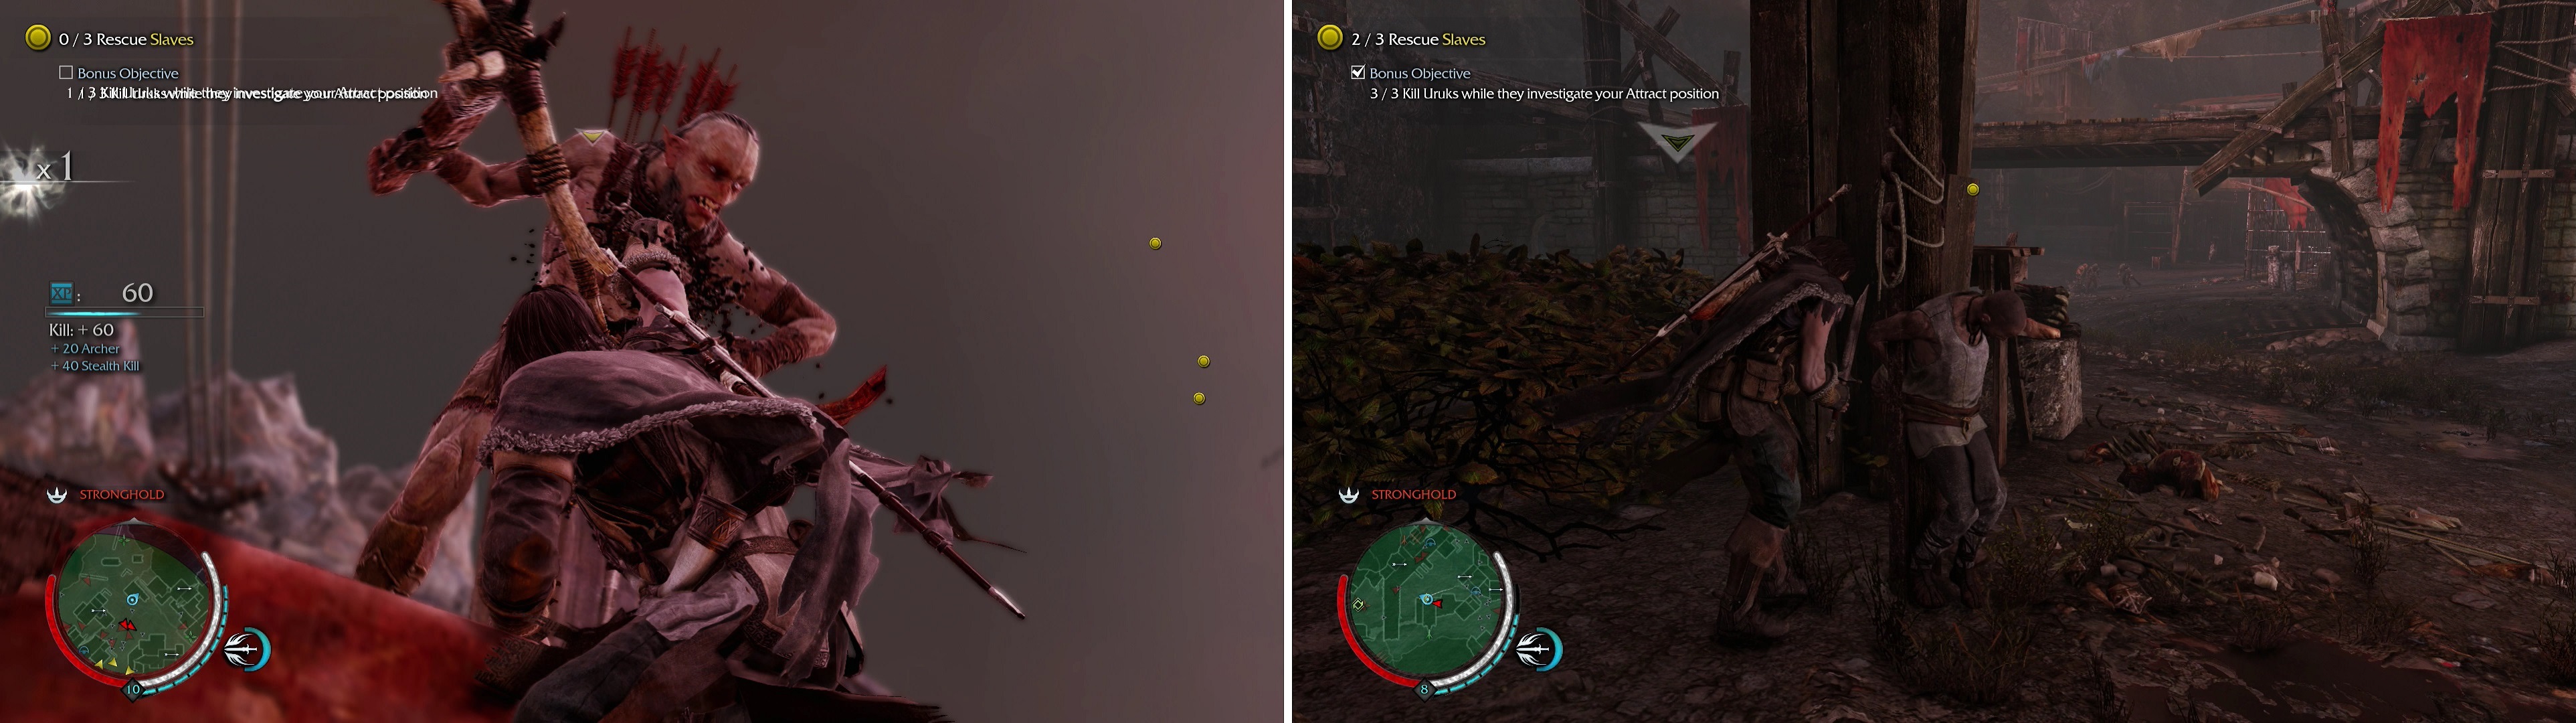 The easiest way to accomplish the bonus objective for this mission is to Attract foes while on a ledge, then perform a Ledge Kill (left). Once you've killed enough, free the slaves (right).